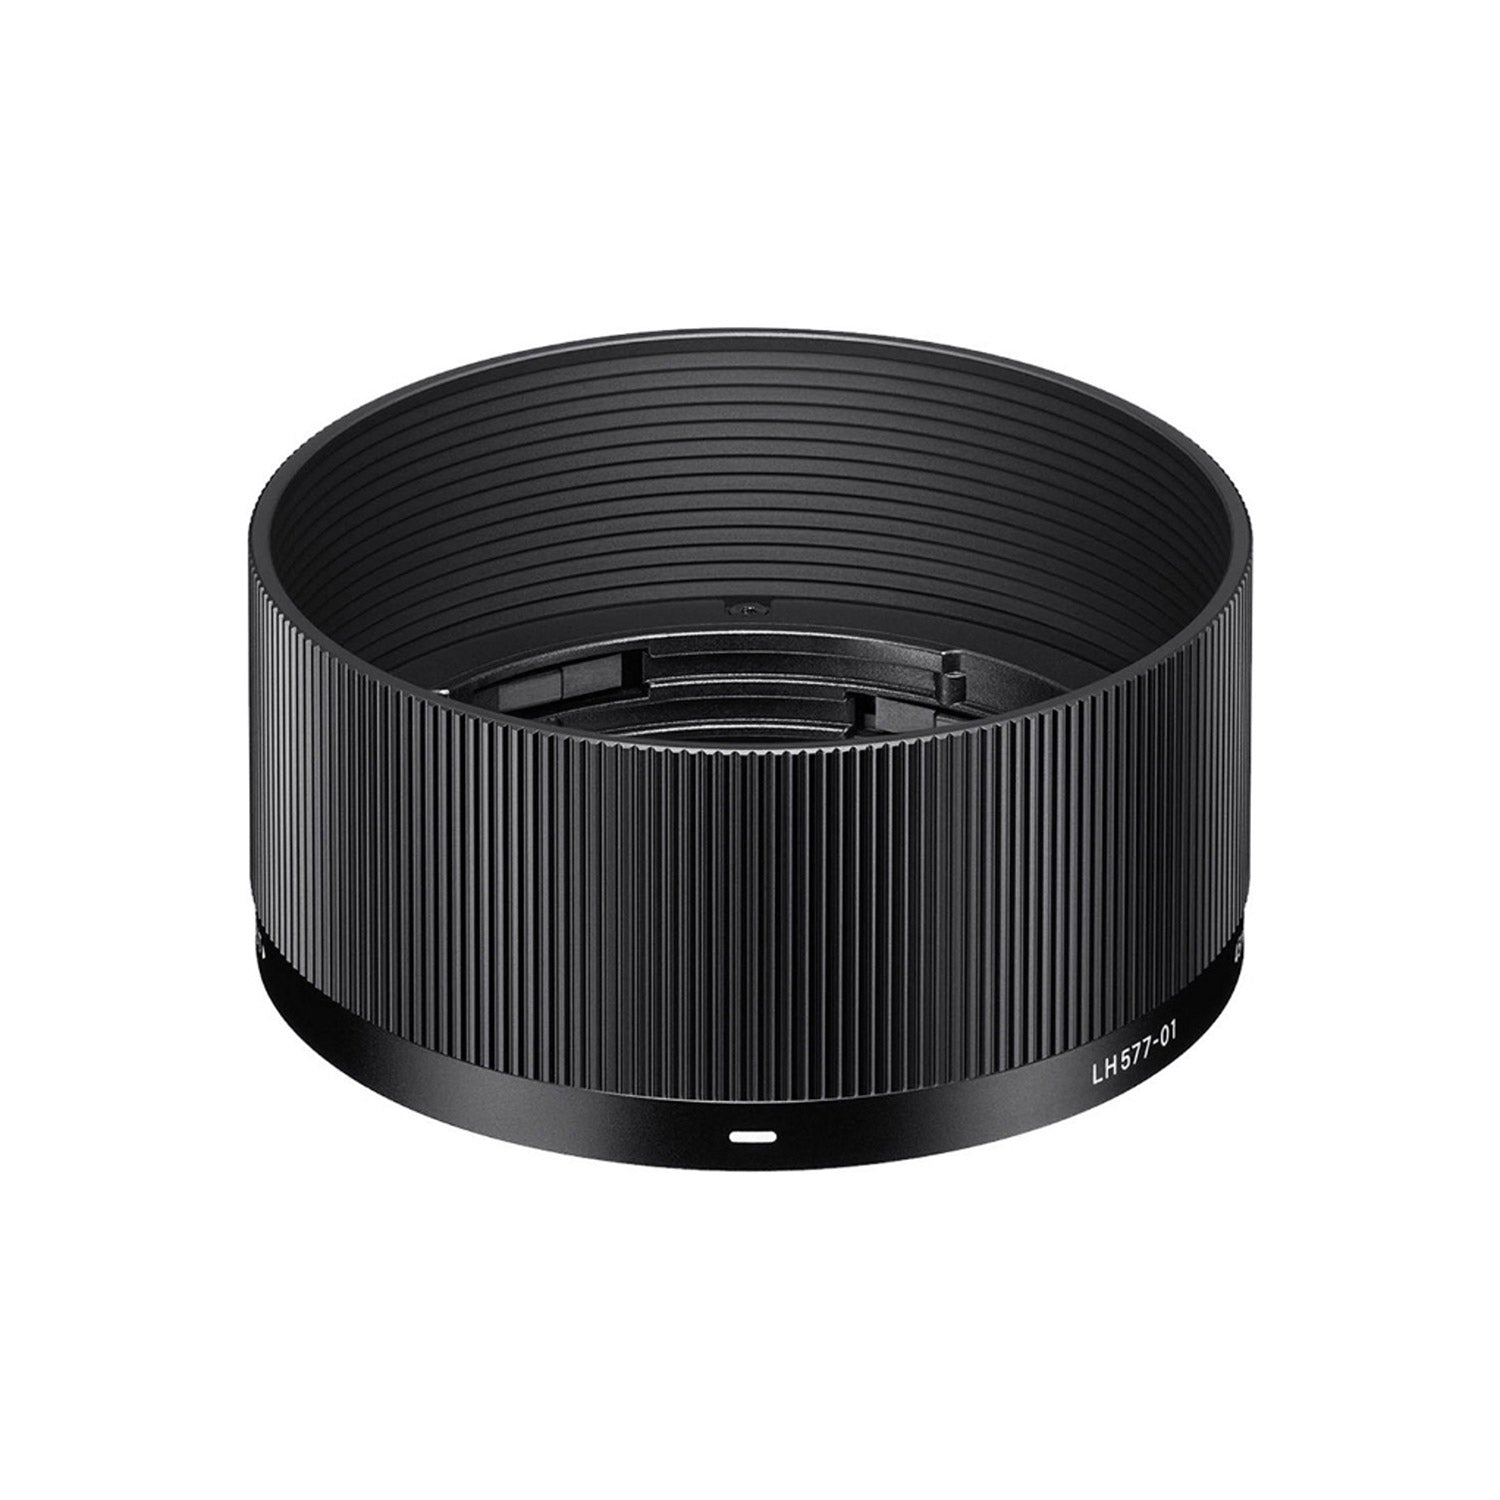 Lens Hood LH577-01 for 45mm F2.8 | Contemporary